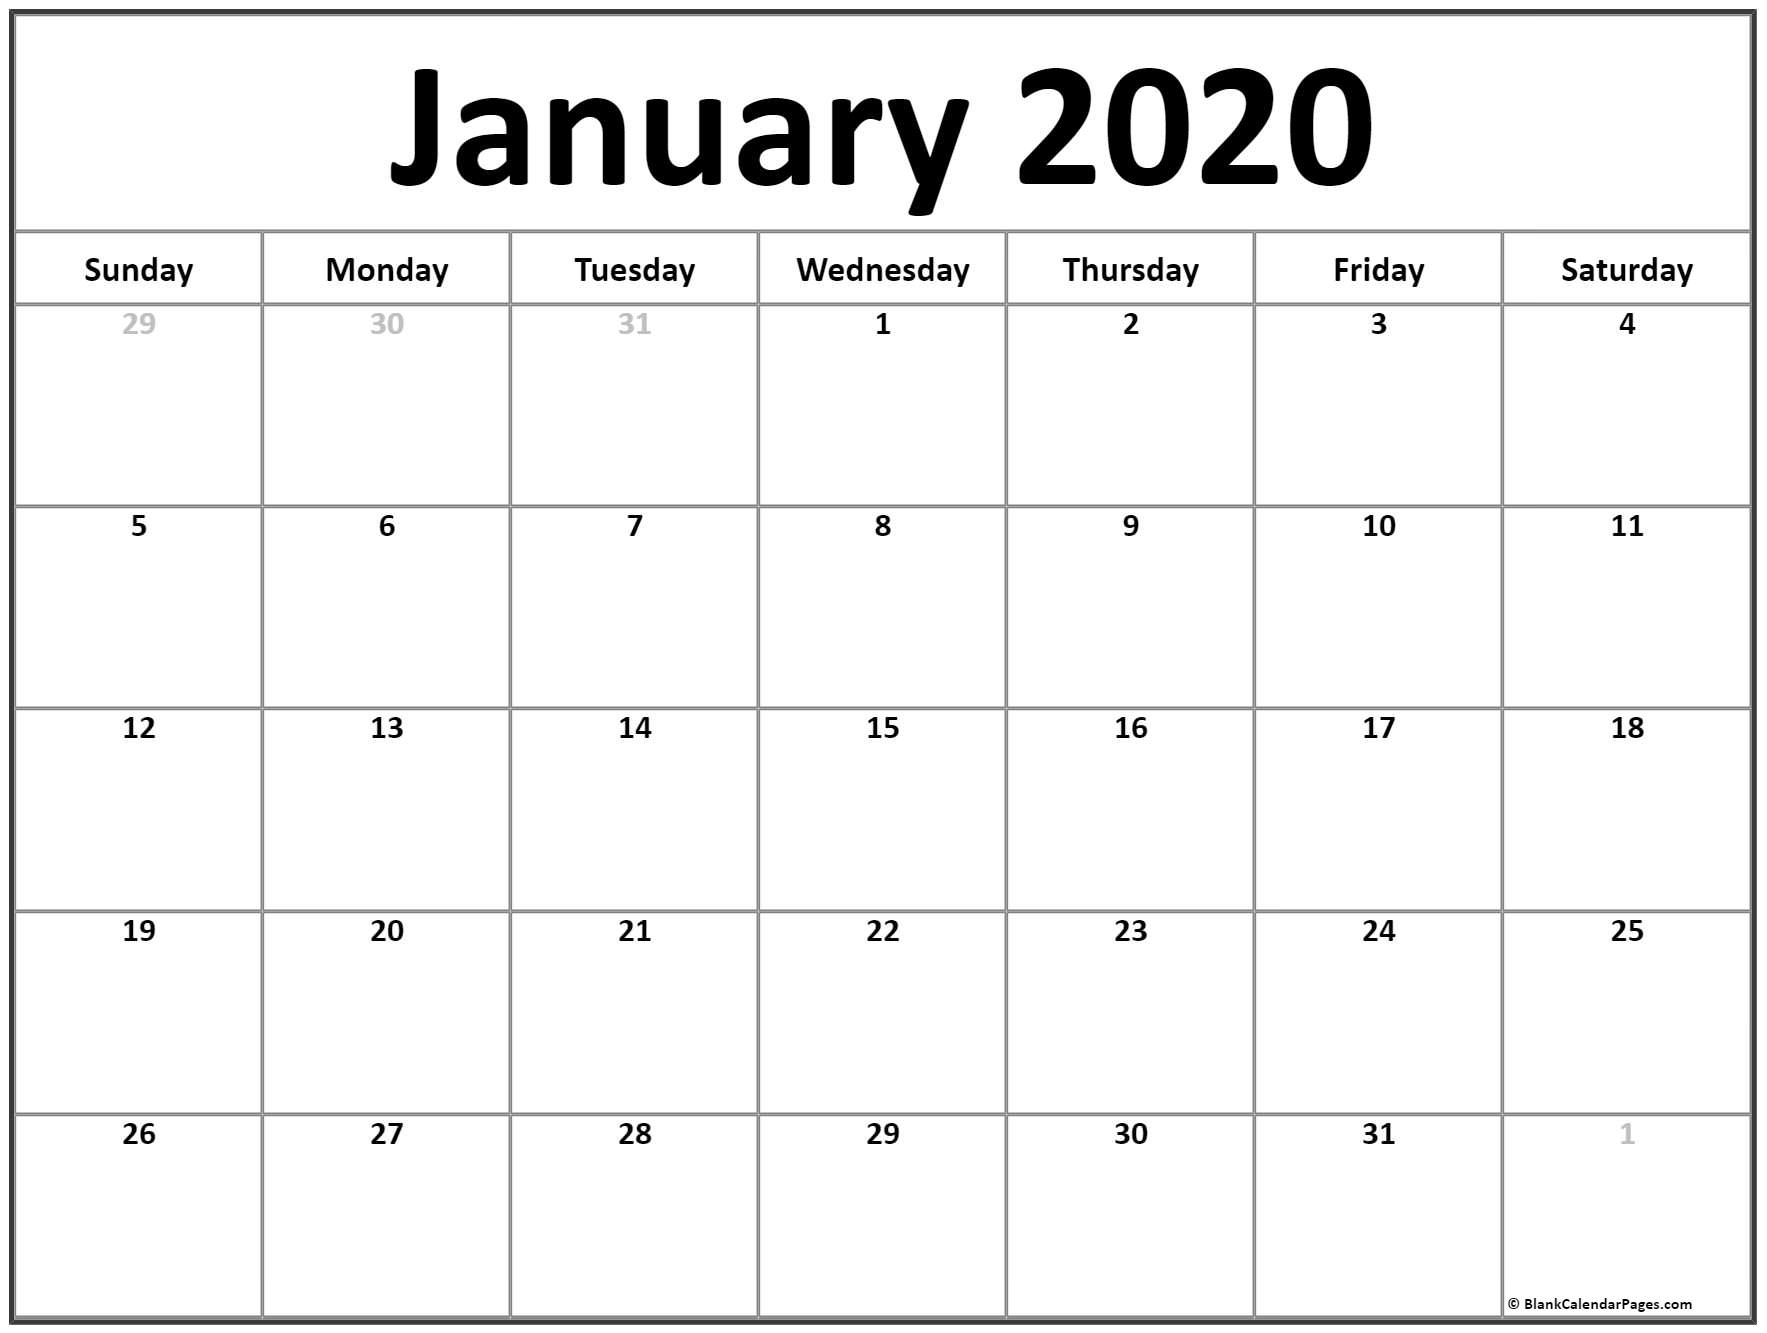 January 2020 Calendar | Free Printable Monthly Calendars Extraordinary Monthly Calendar 2020 Without Weekends